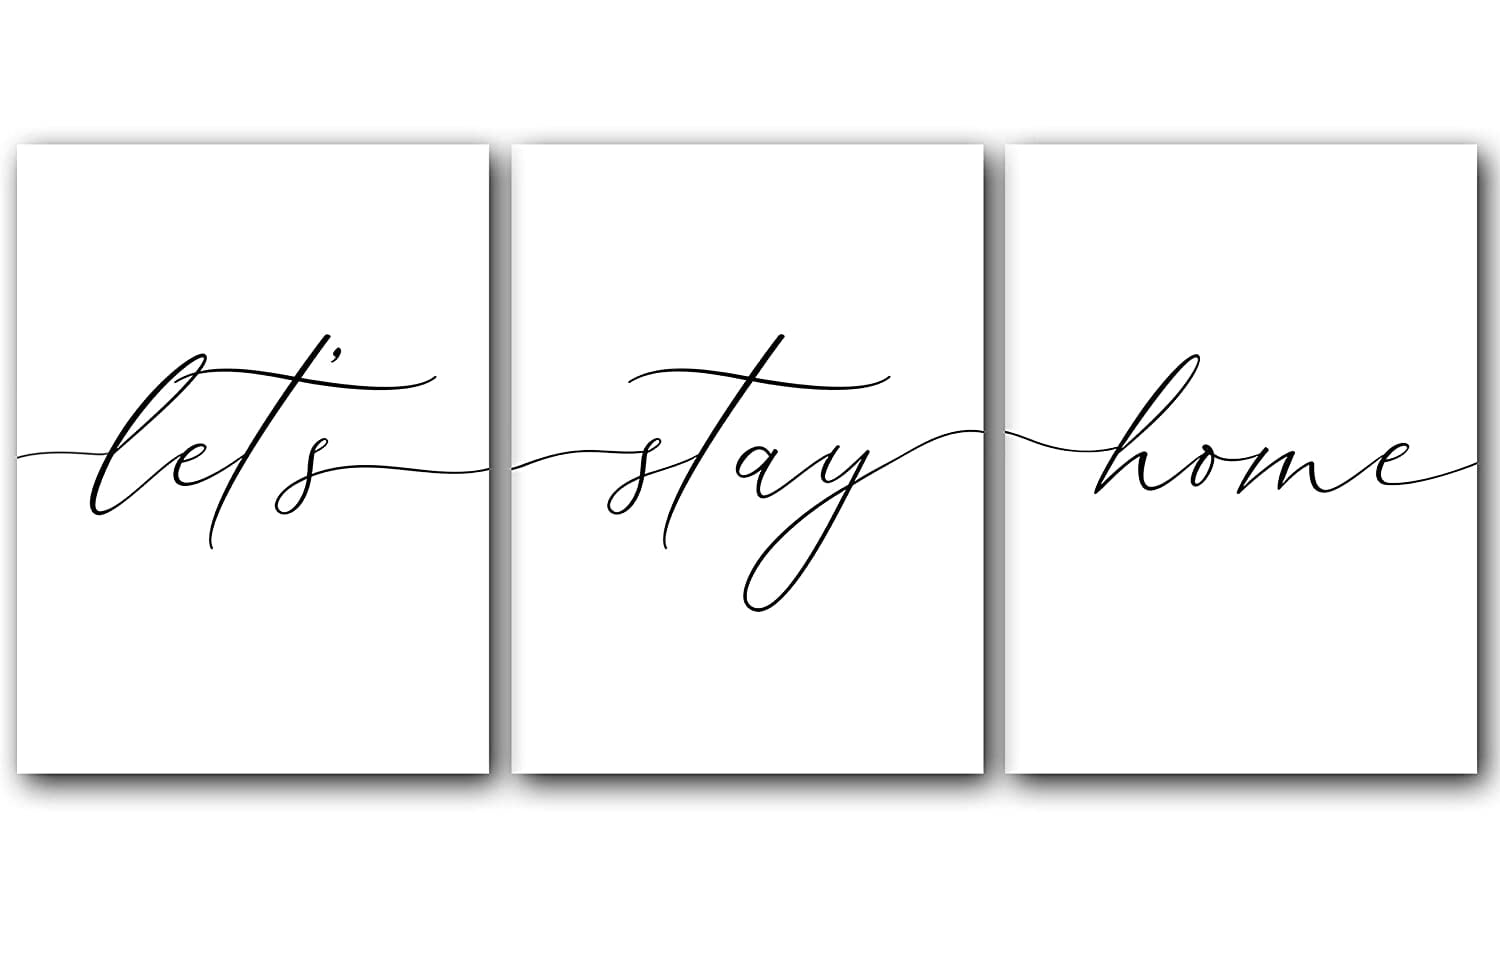 Home Decor Hanging Wall Art Canvas & Wood Let's Stay Home